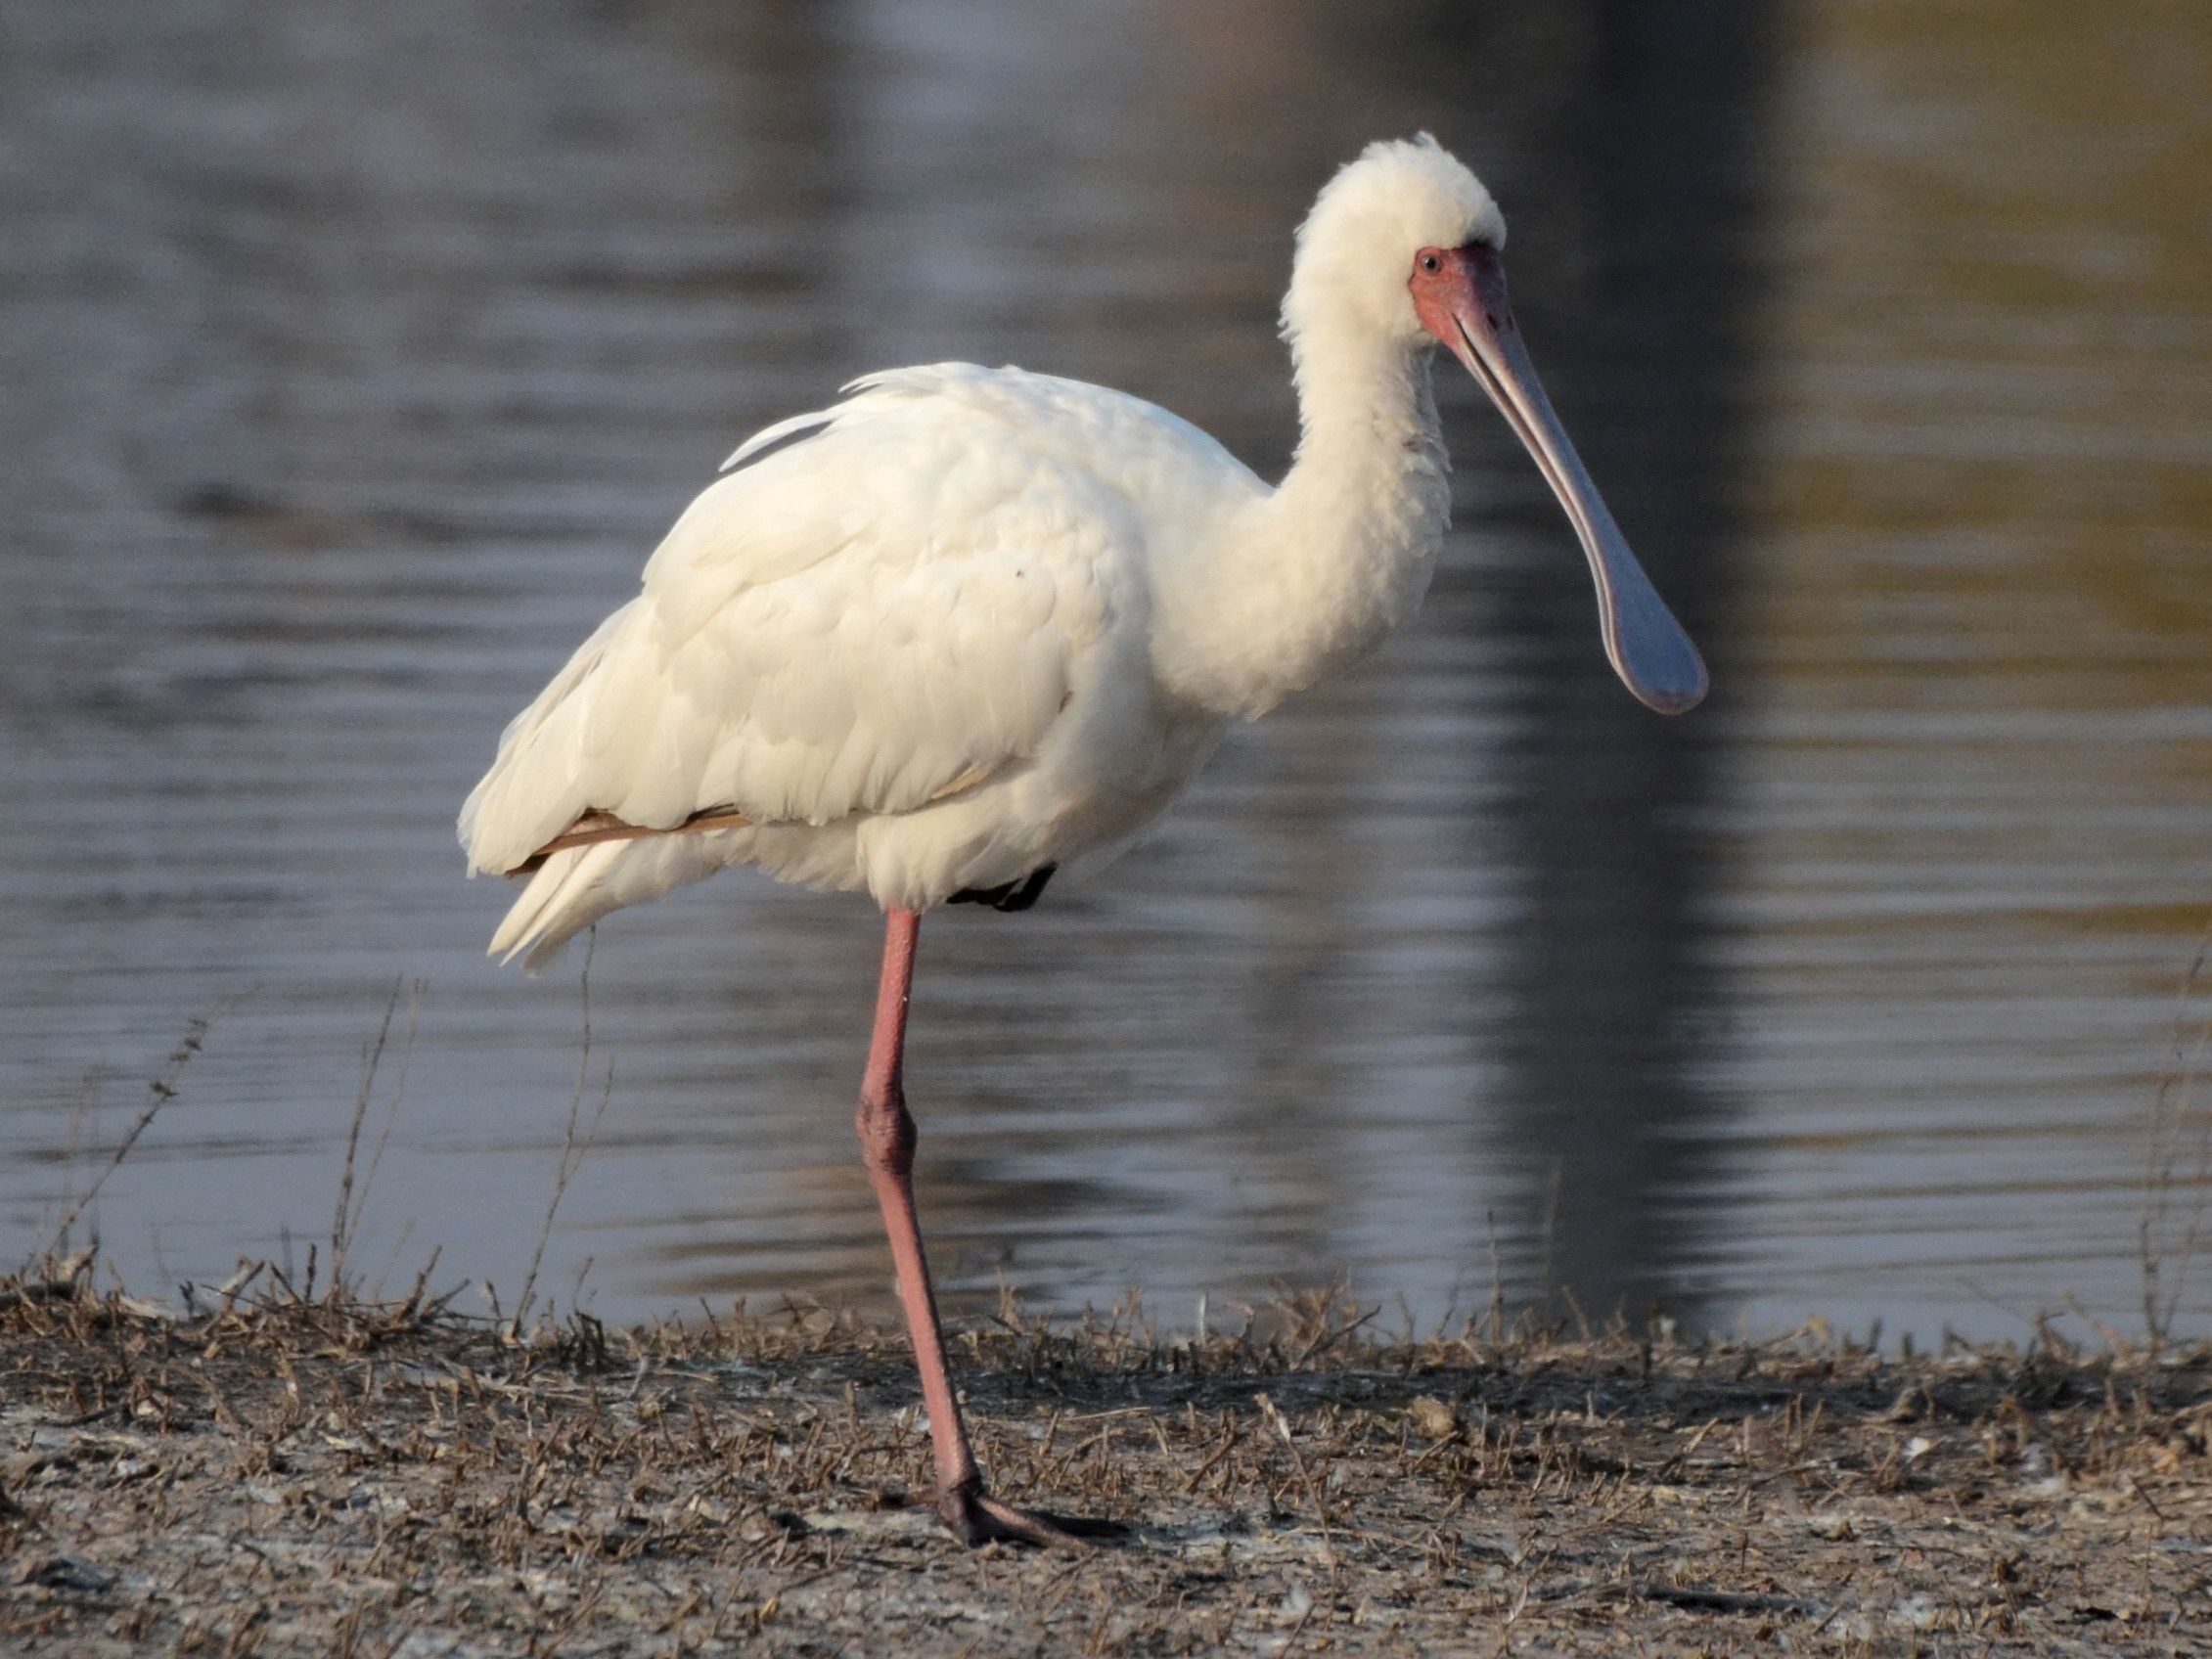 Click picture to see more African Spoonbills.